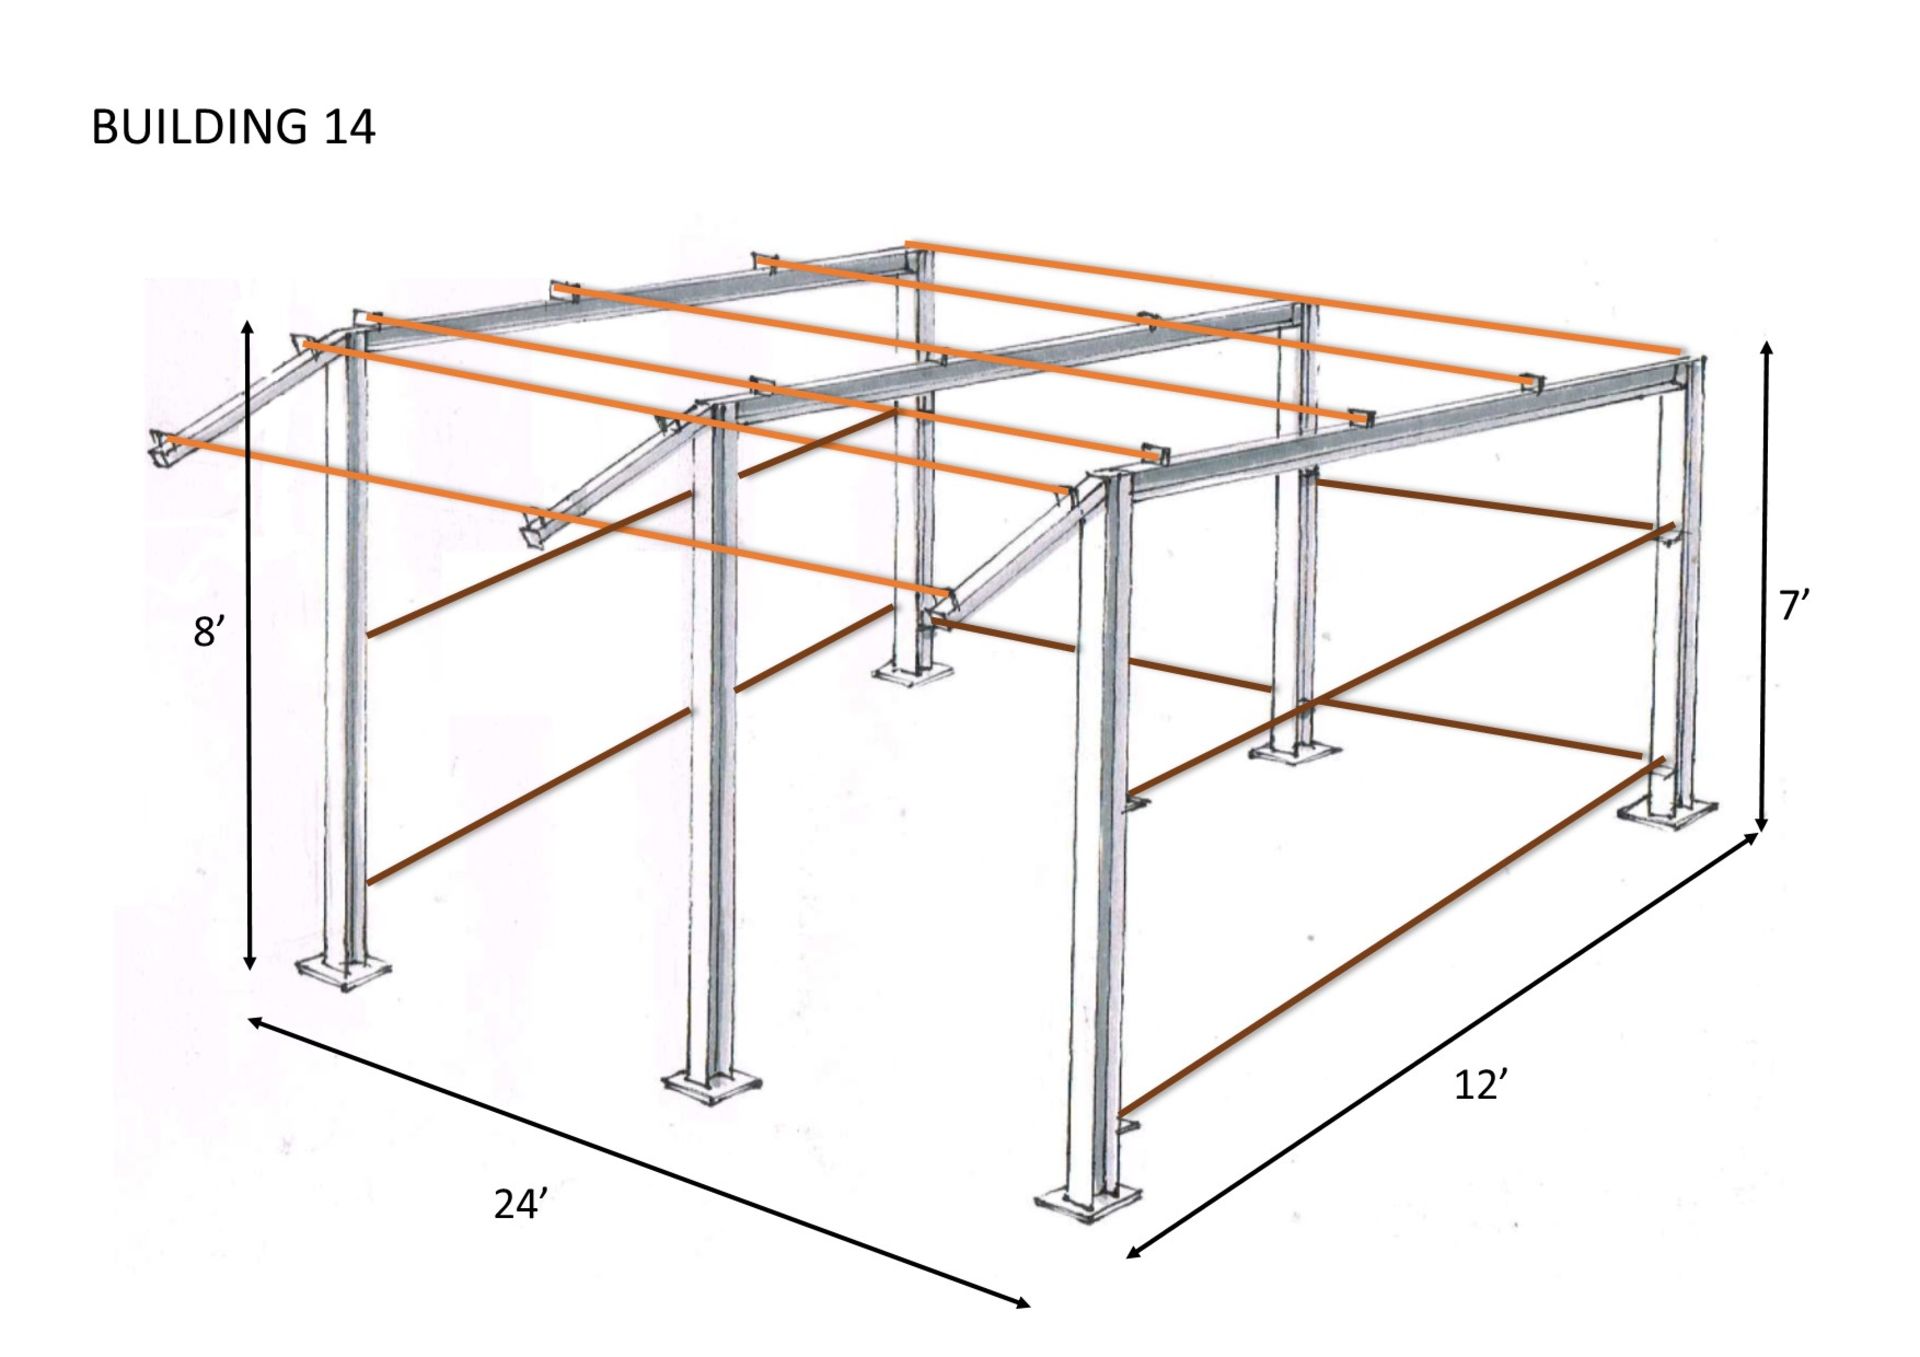 Steel framed stable/mono slope 24ftlong x 12ft wide x 8ft @front x7ft @ back x 3 ft canopy (e1224) - Image 9 of 12